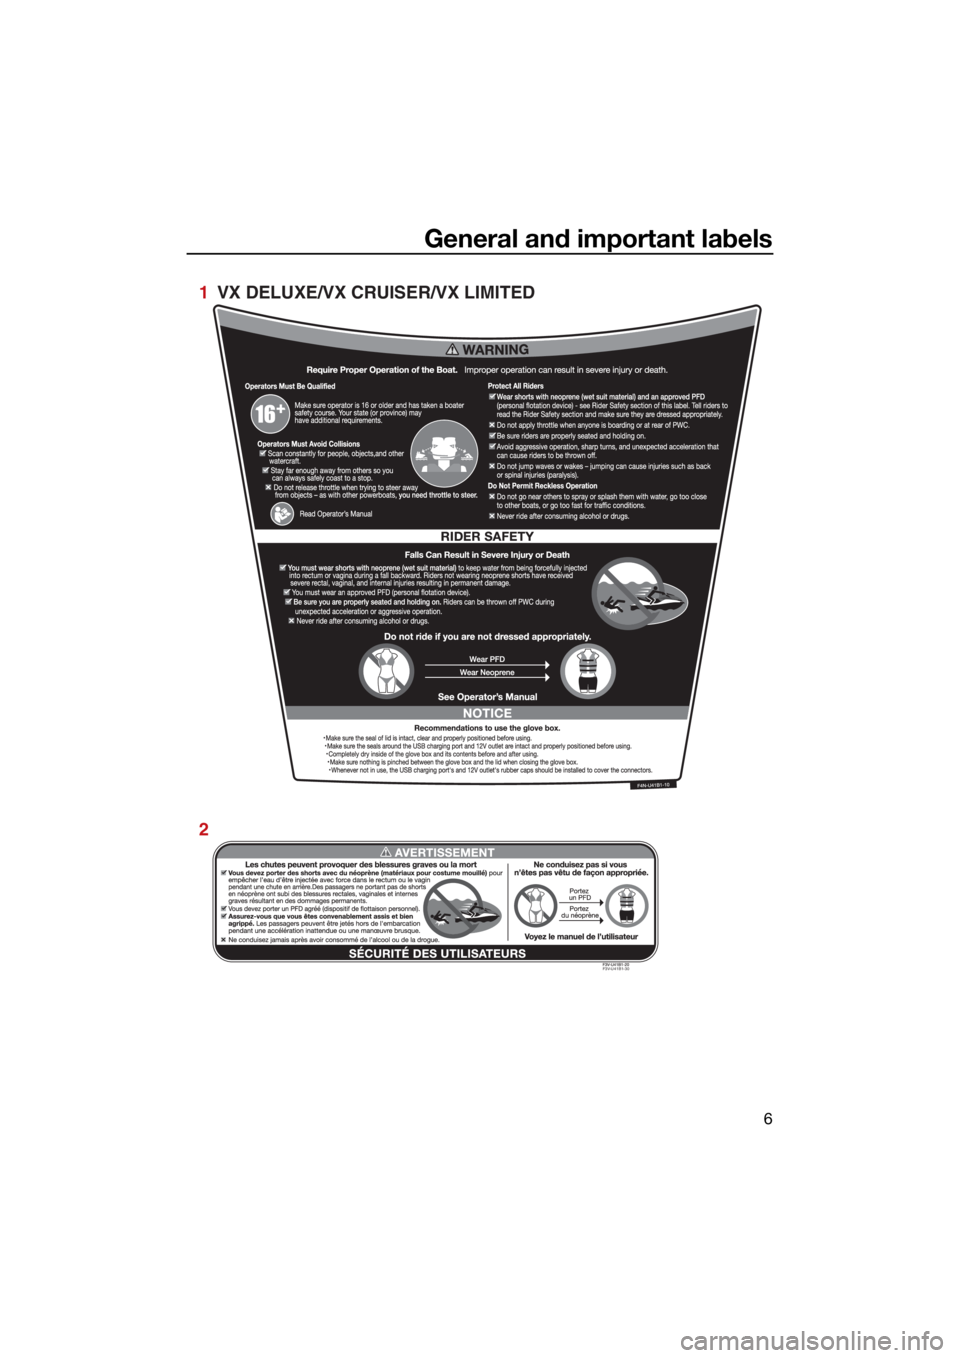 YAMAHA VX CRUISER 2022 User Guide General and important labels
6
F3V-U41B1-30
1  VX DELUXE/VX CRUISER/VX LIMITED
2
UF4N71E0.book  Page 6  Thursday, August 5, 2021  11:58 AM 